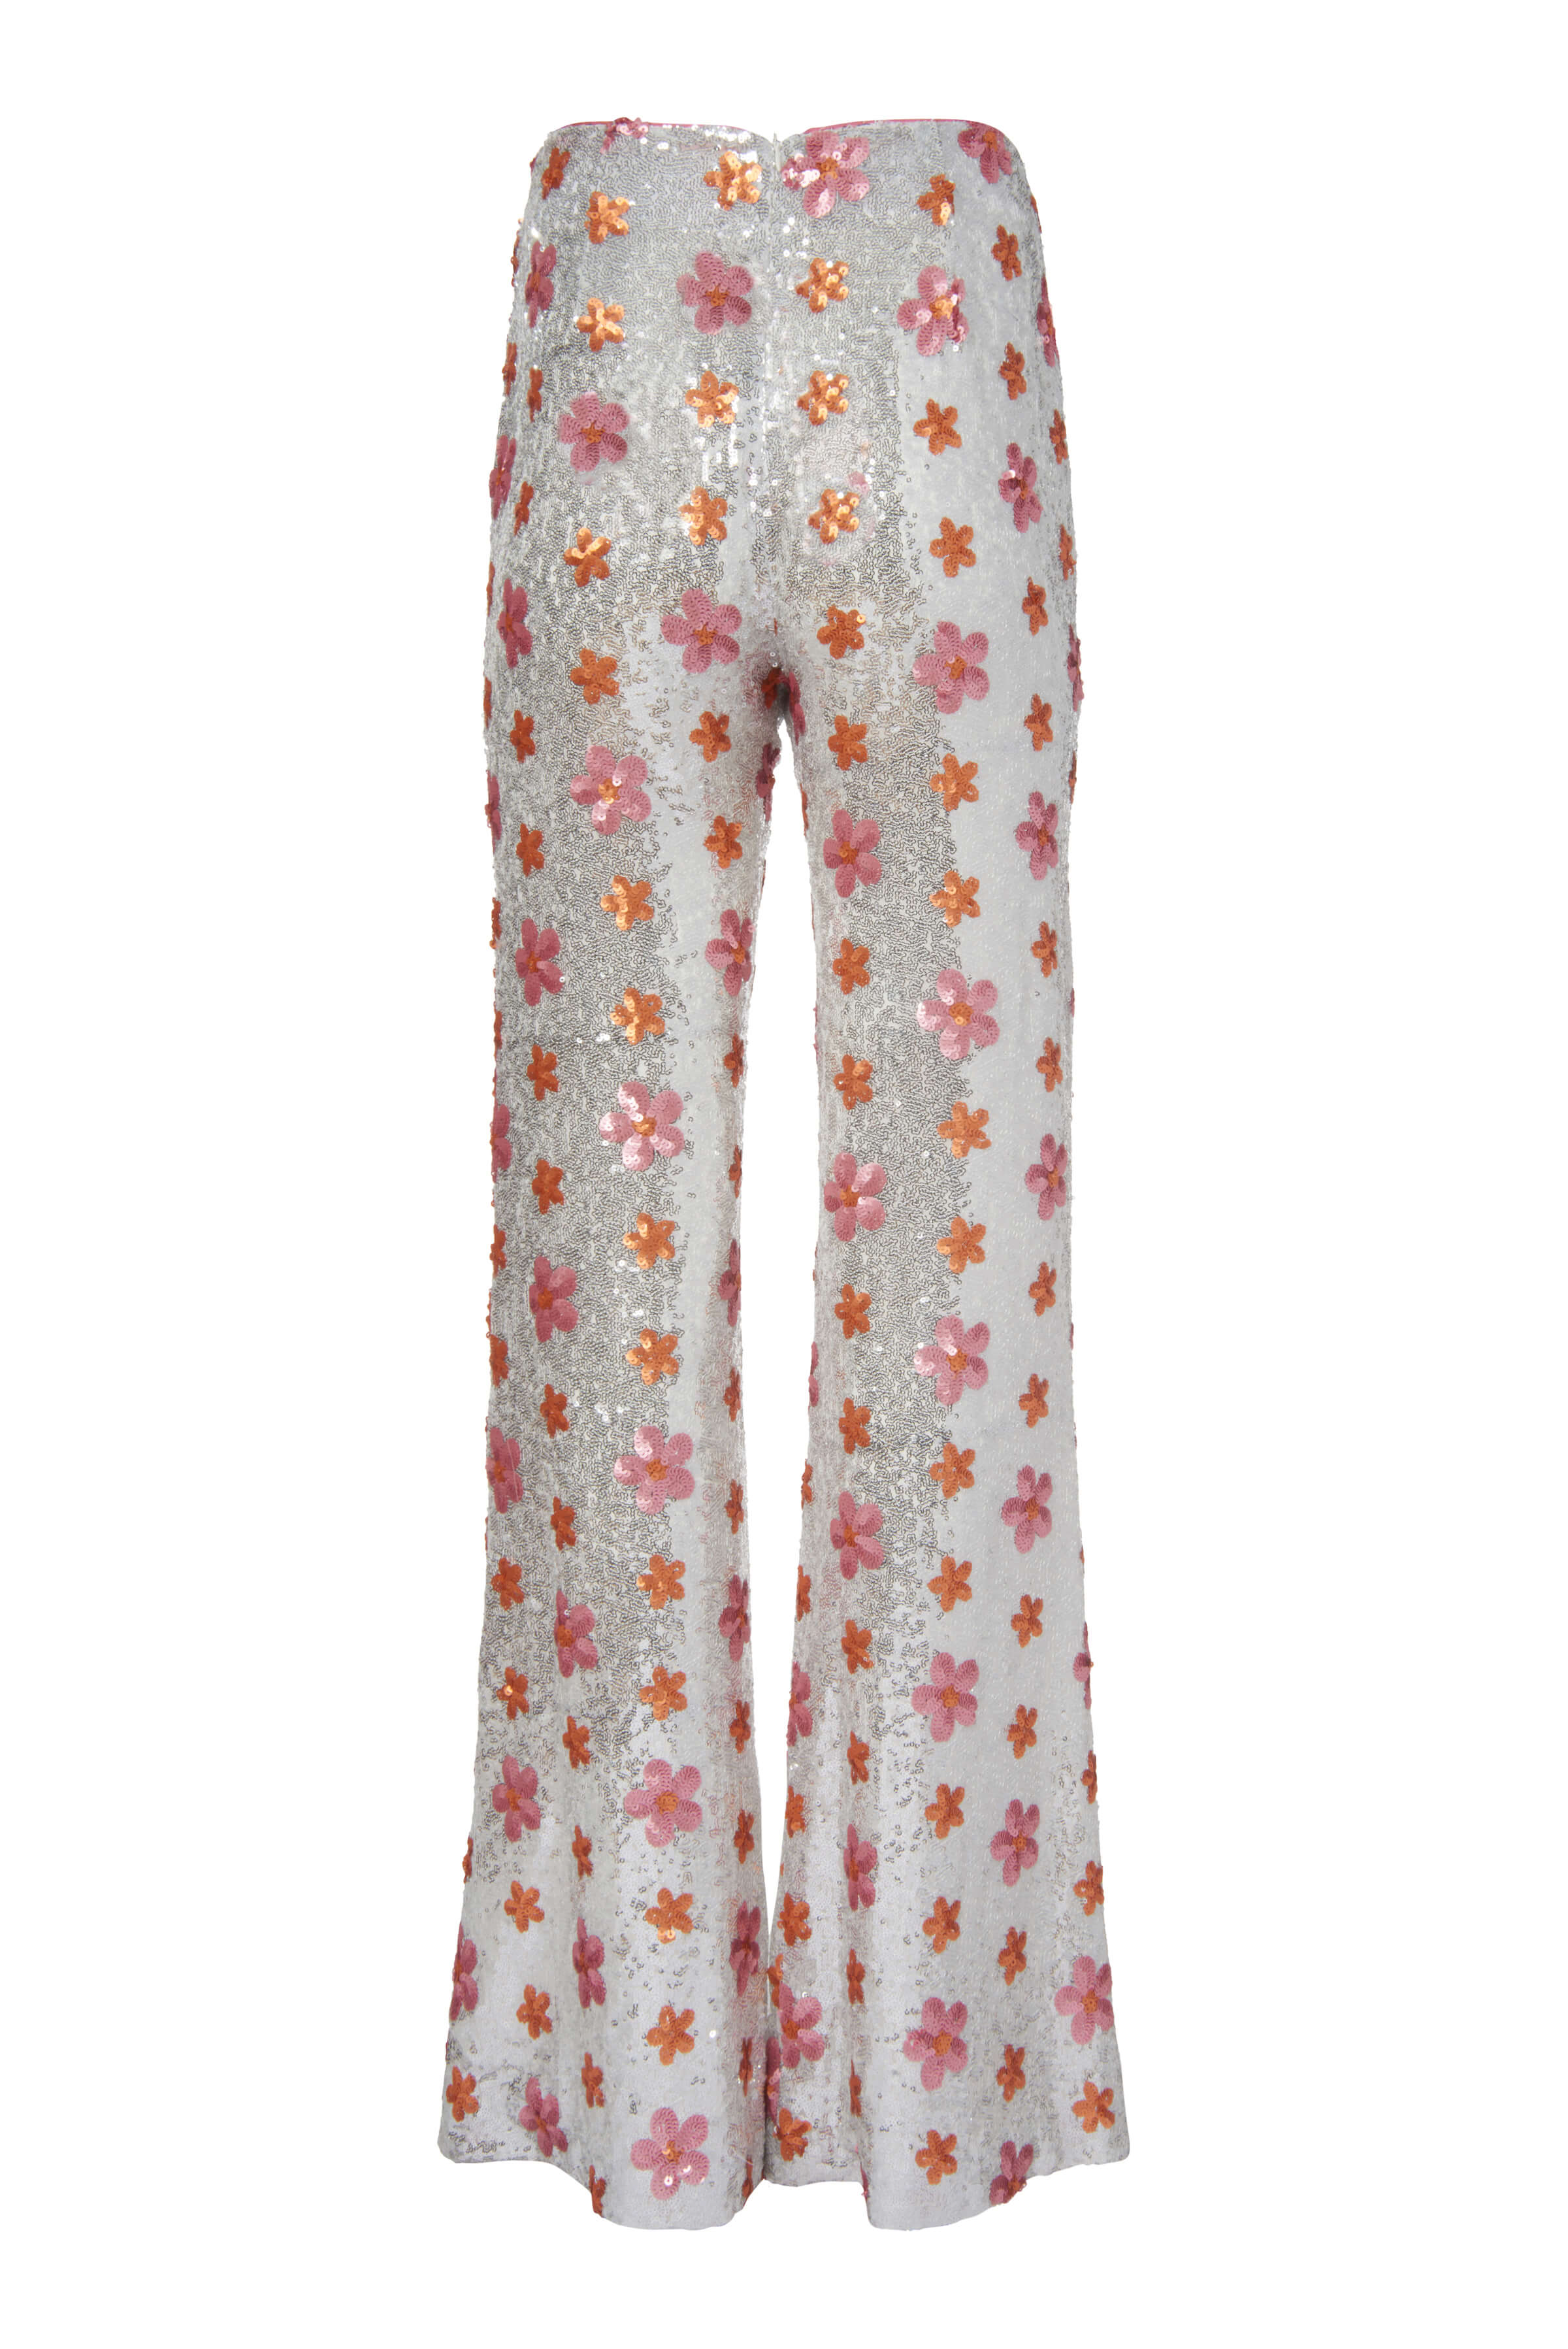 FINAL SALE: Ines Silver Sequin Floral Pant